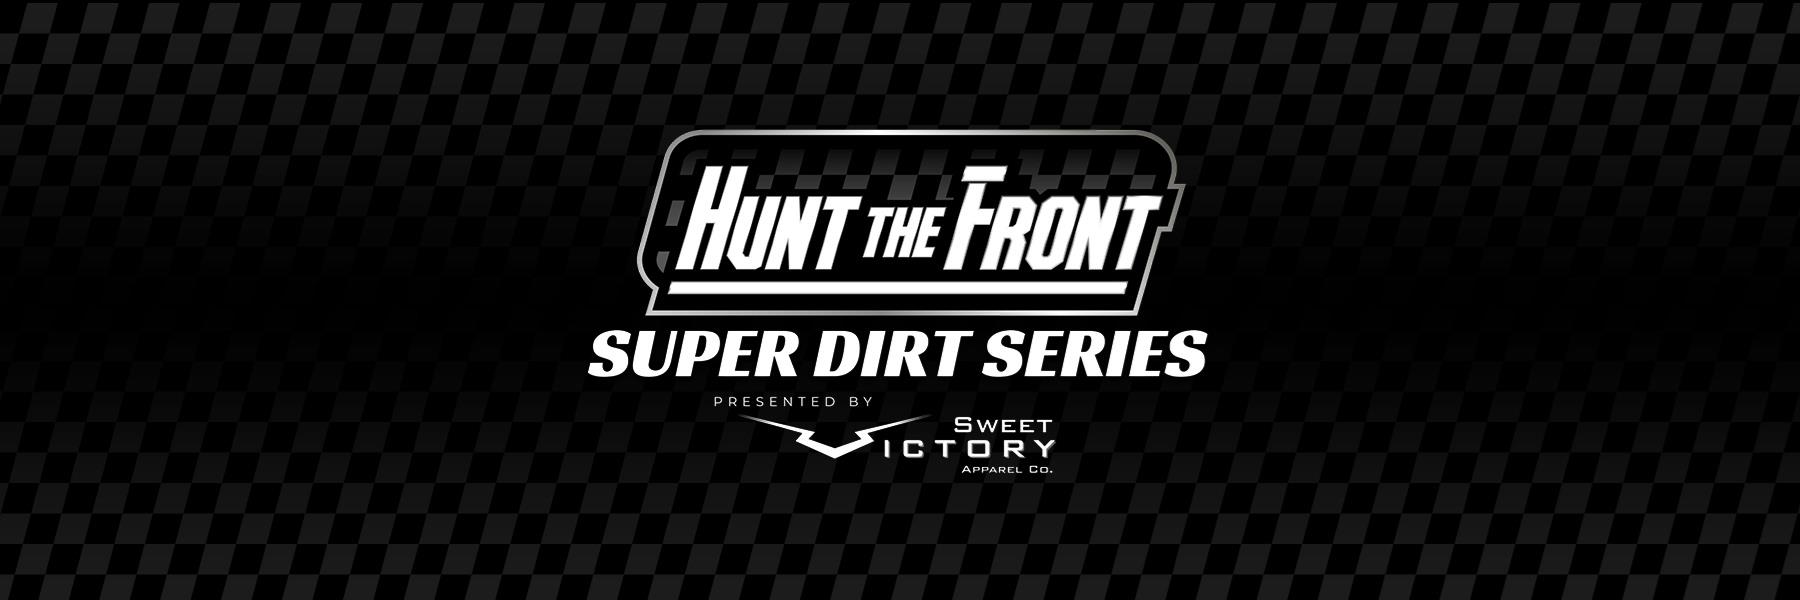 Hunt The Front Super Dirt Series